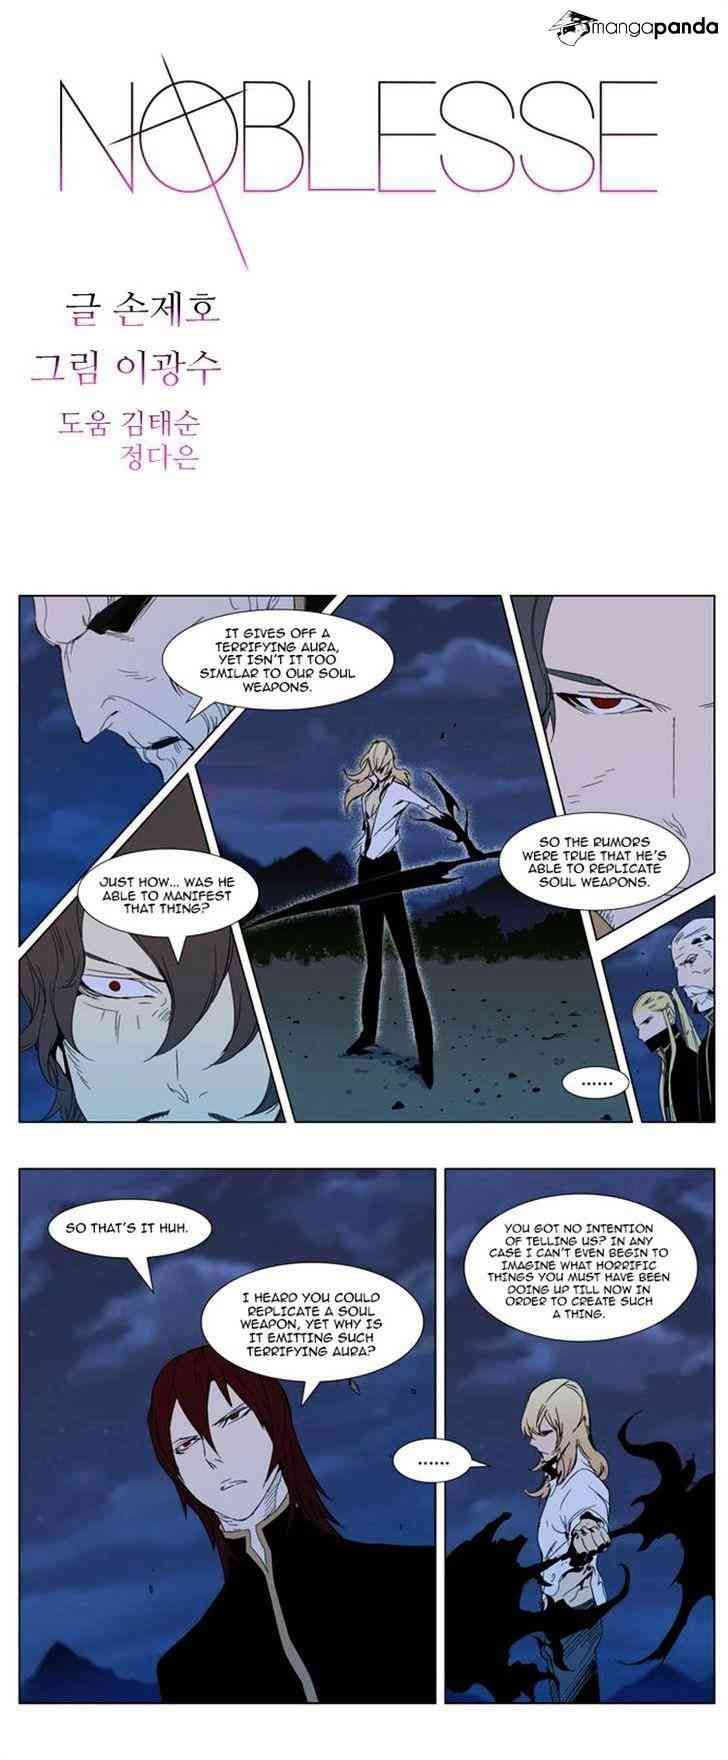 Noblesse Chapter 292 page 1